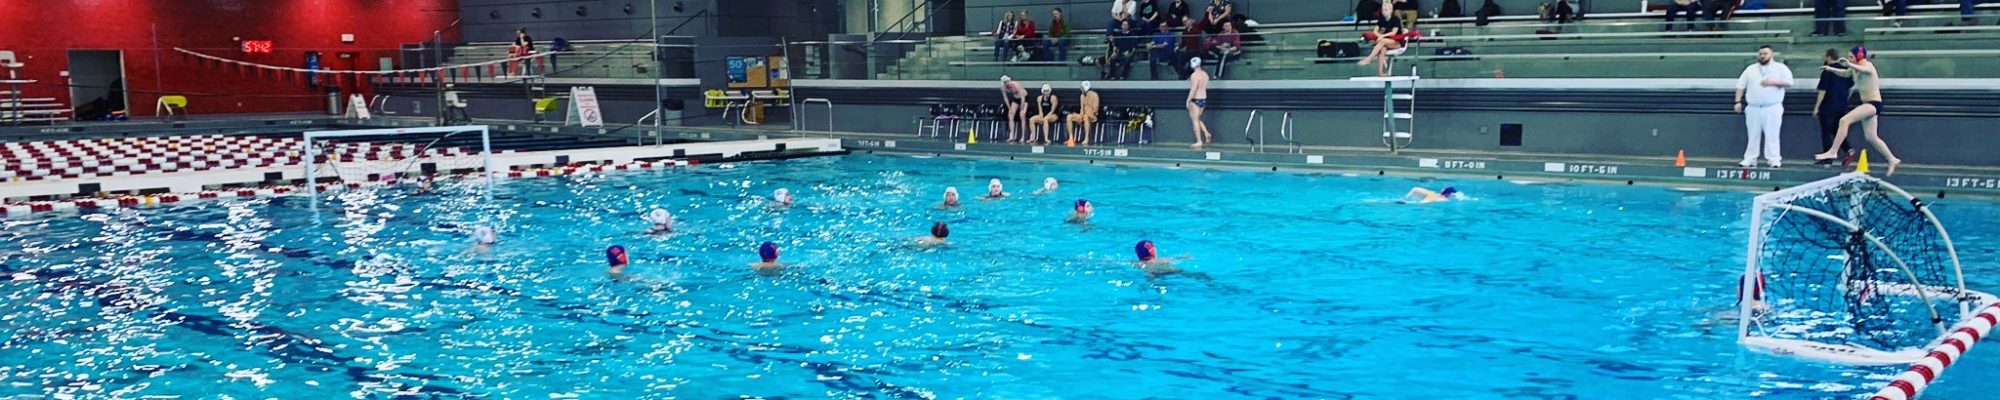 Ohio Squirrels Water Polo Club – Co-ed Master Water Polo Club in ...